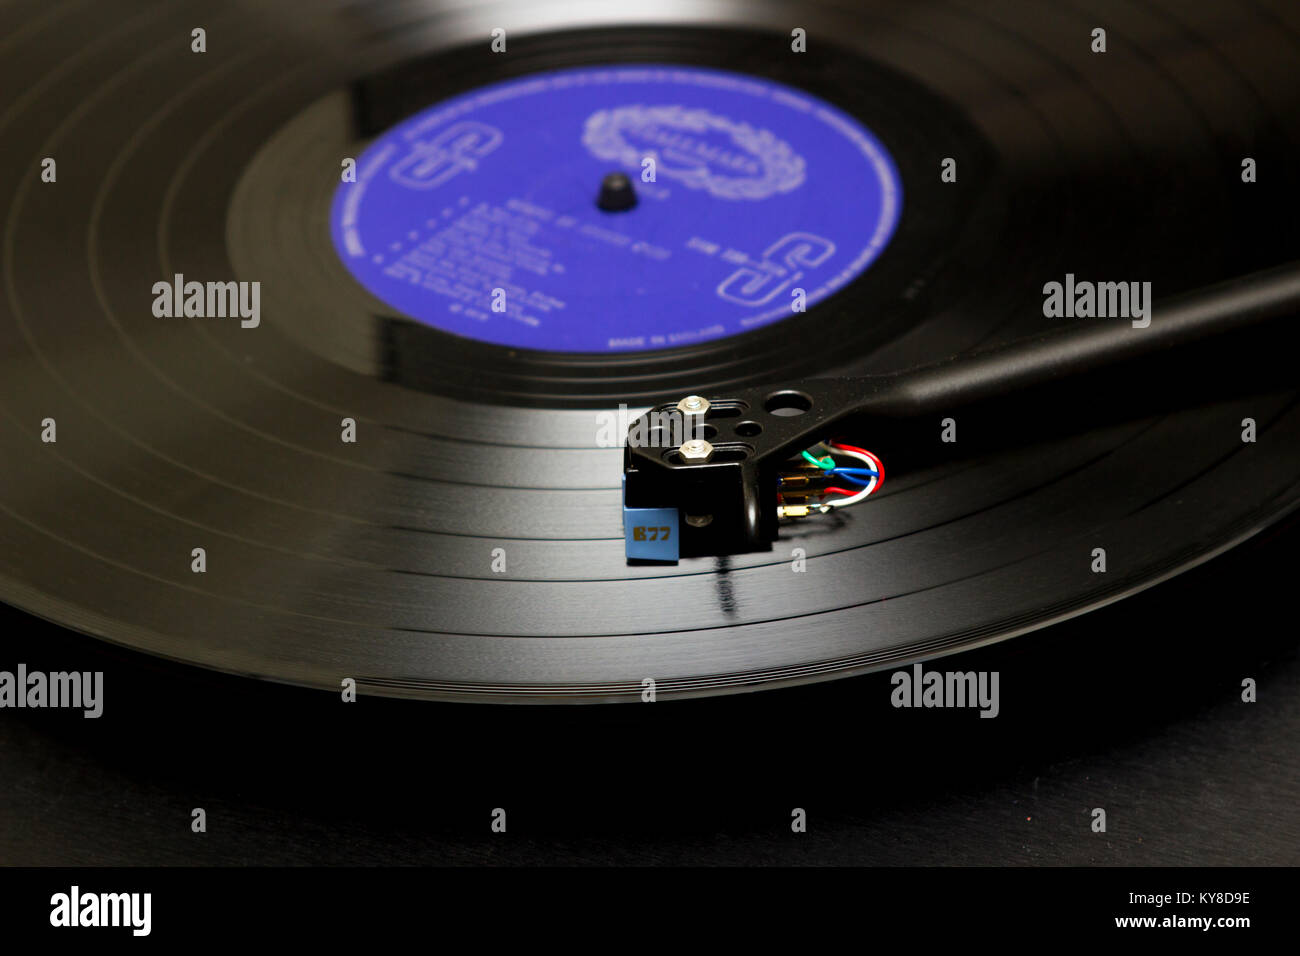 A long playing vinyl record on a turntable with tone arm and cartridge on view. The disc carries the old Hallmark Label Stock Photo